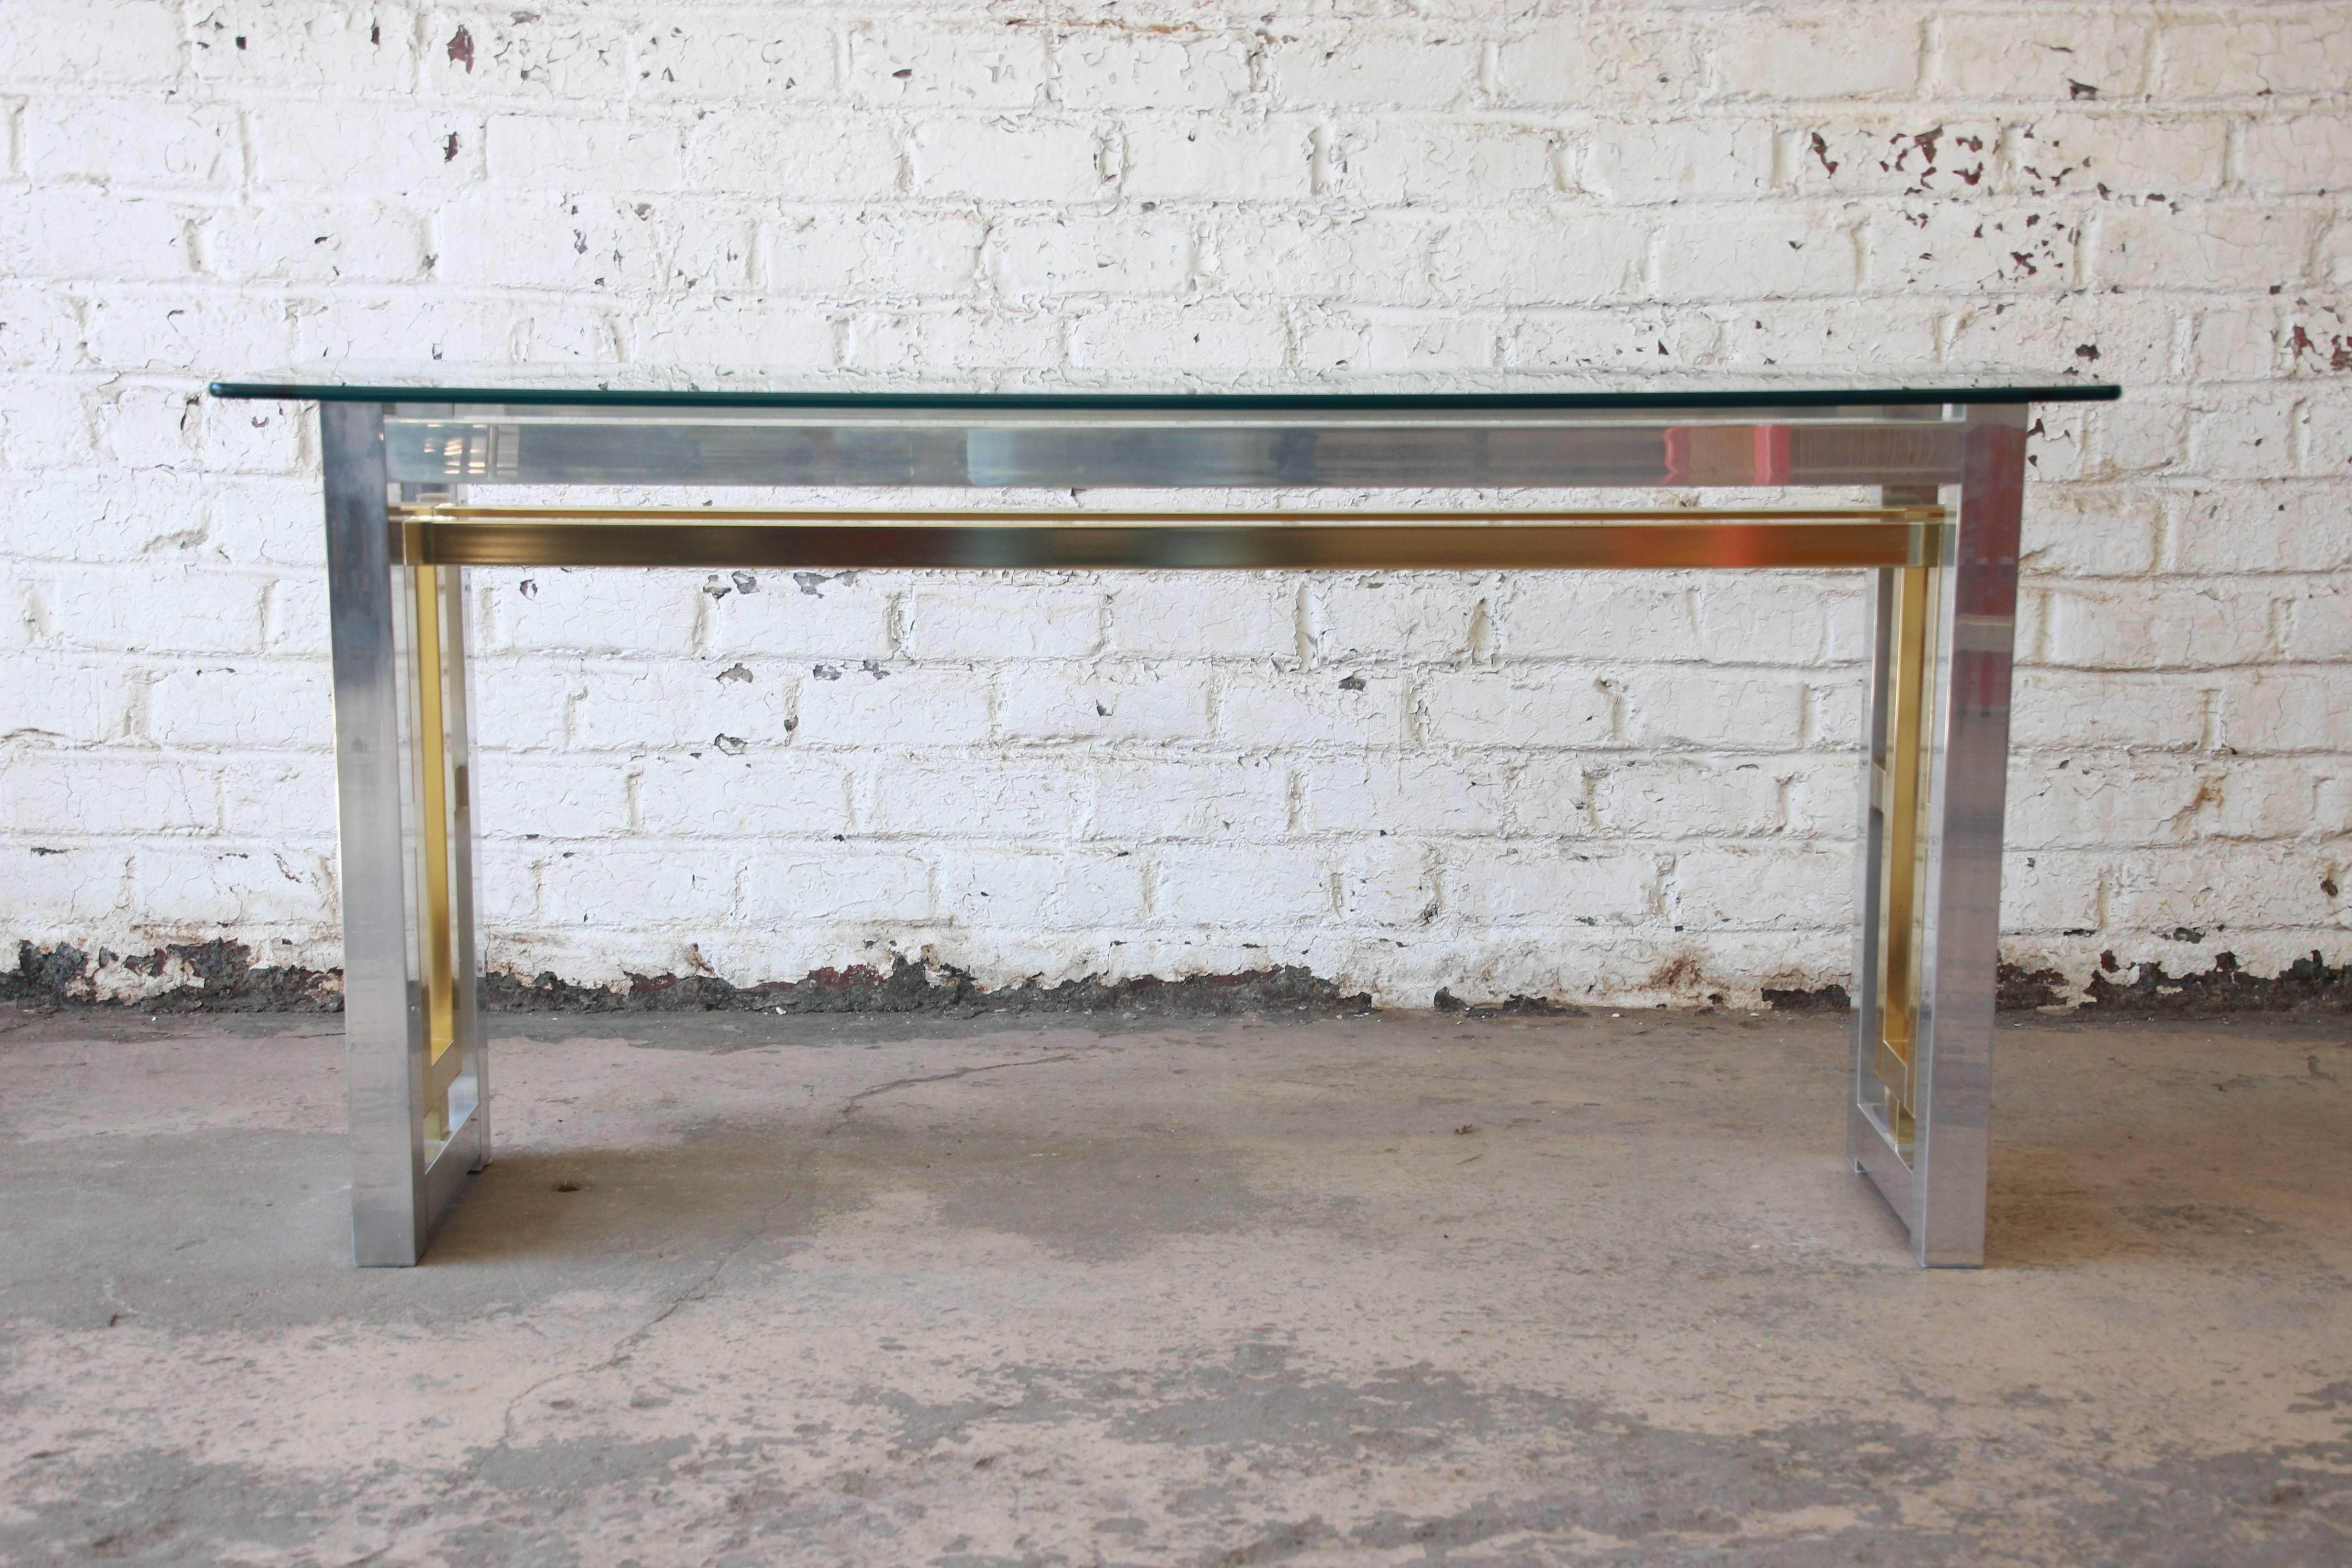 Romeo Rega style console table with thick polished edge glass top and mirrored finish chrome and brass. The piece offers a nice two-toned contrast for an elegant piece in any home.